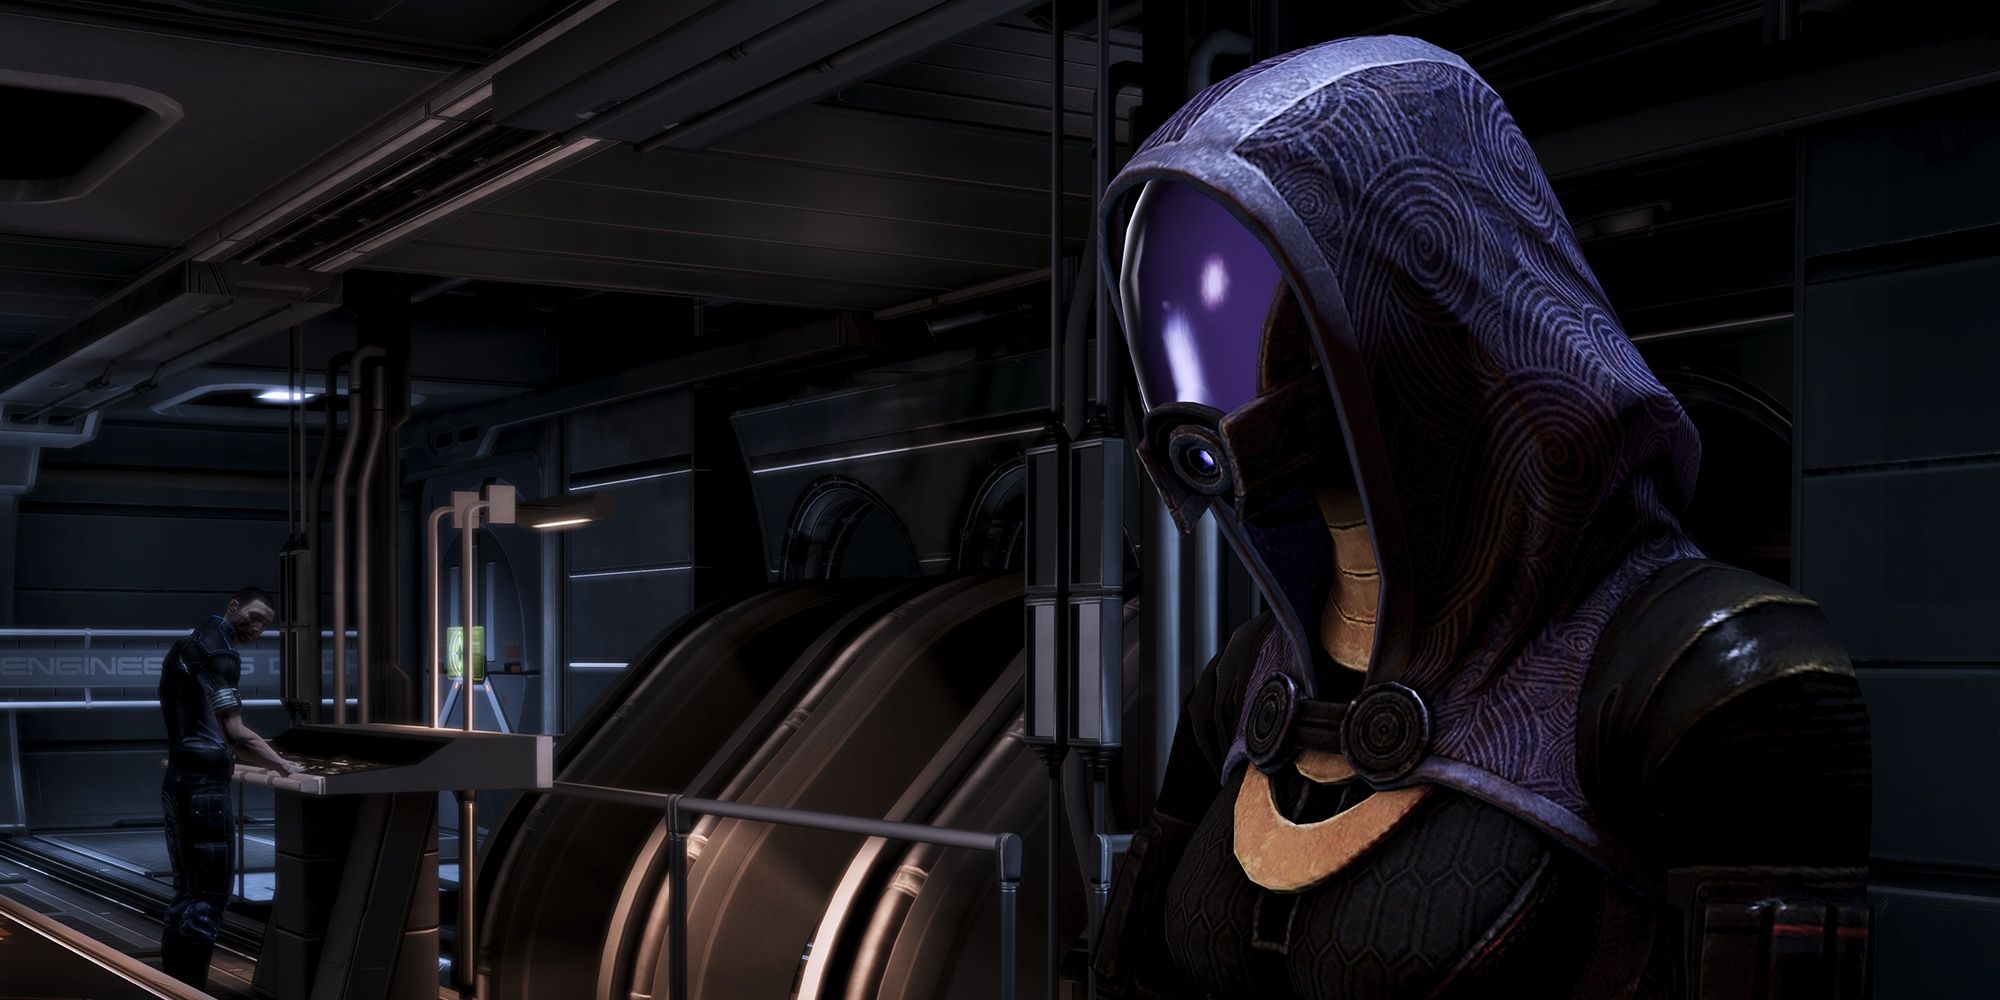  Mass Effect 2 Tali'Zorah stands in the engine room of the Normandy